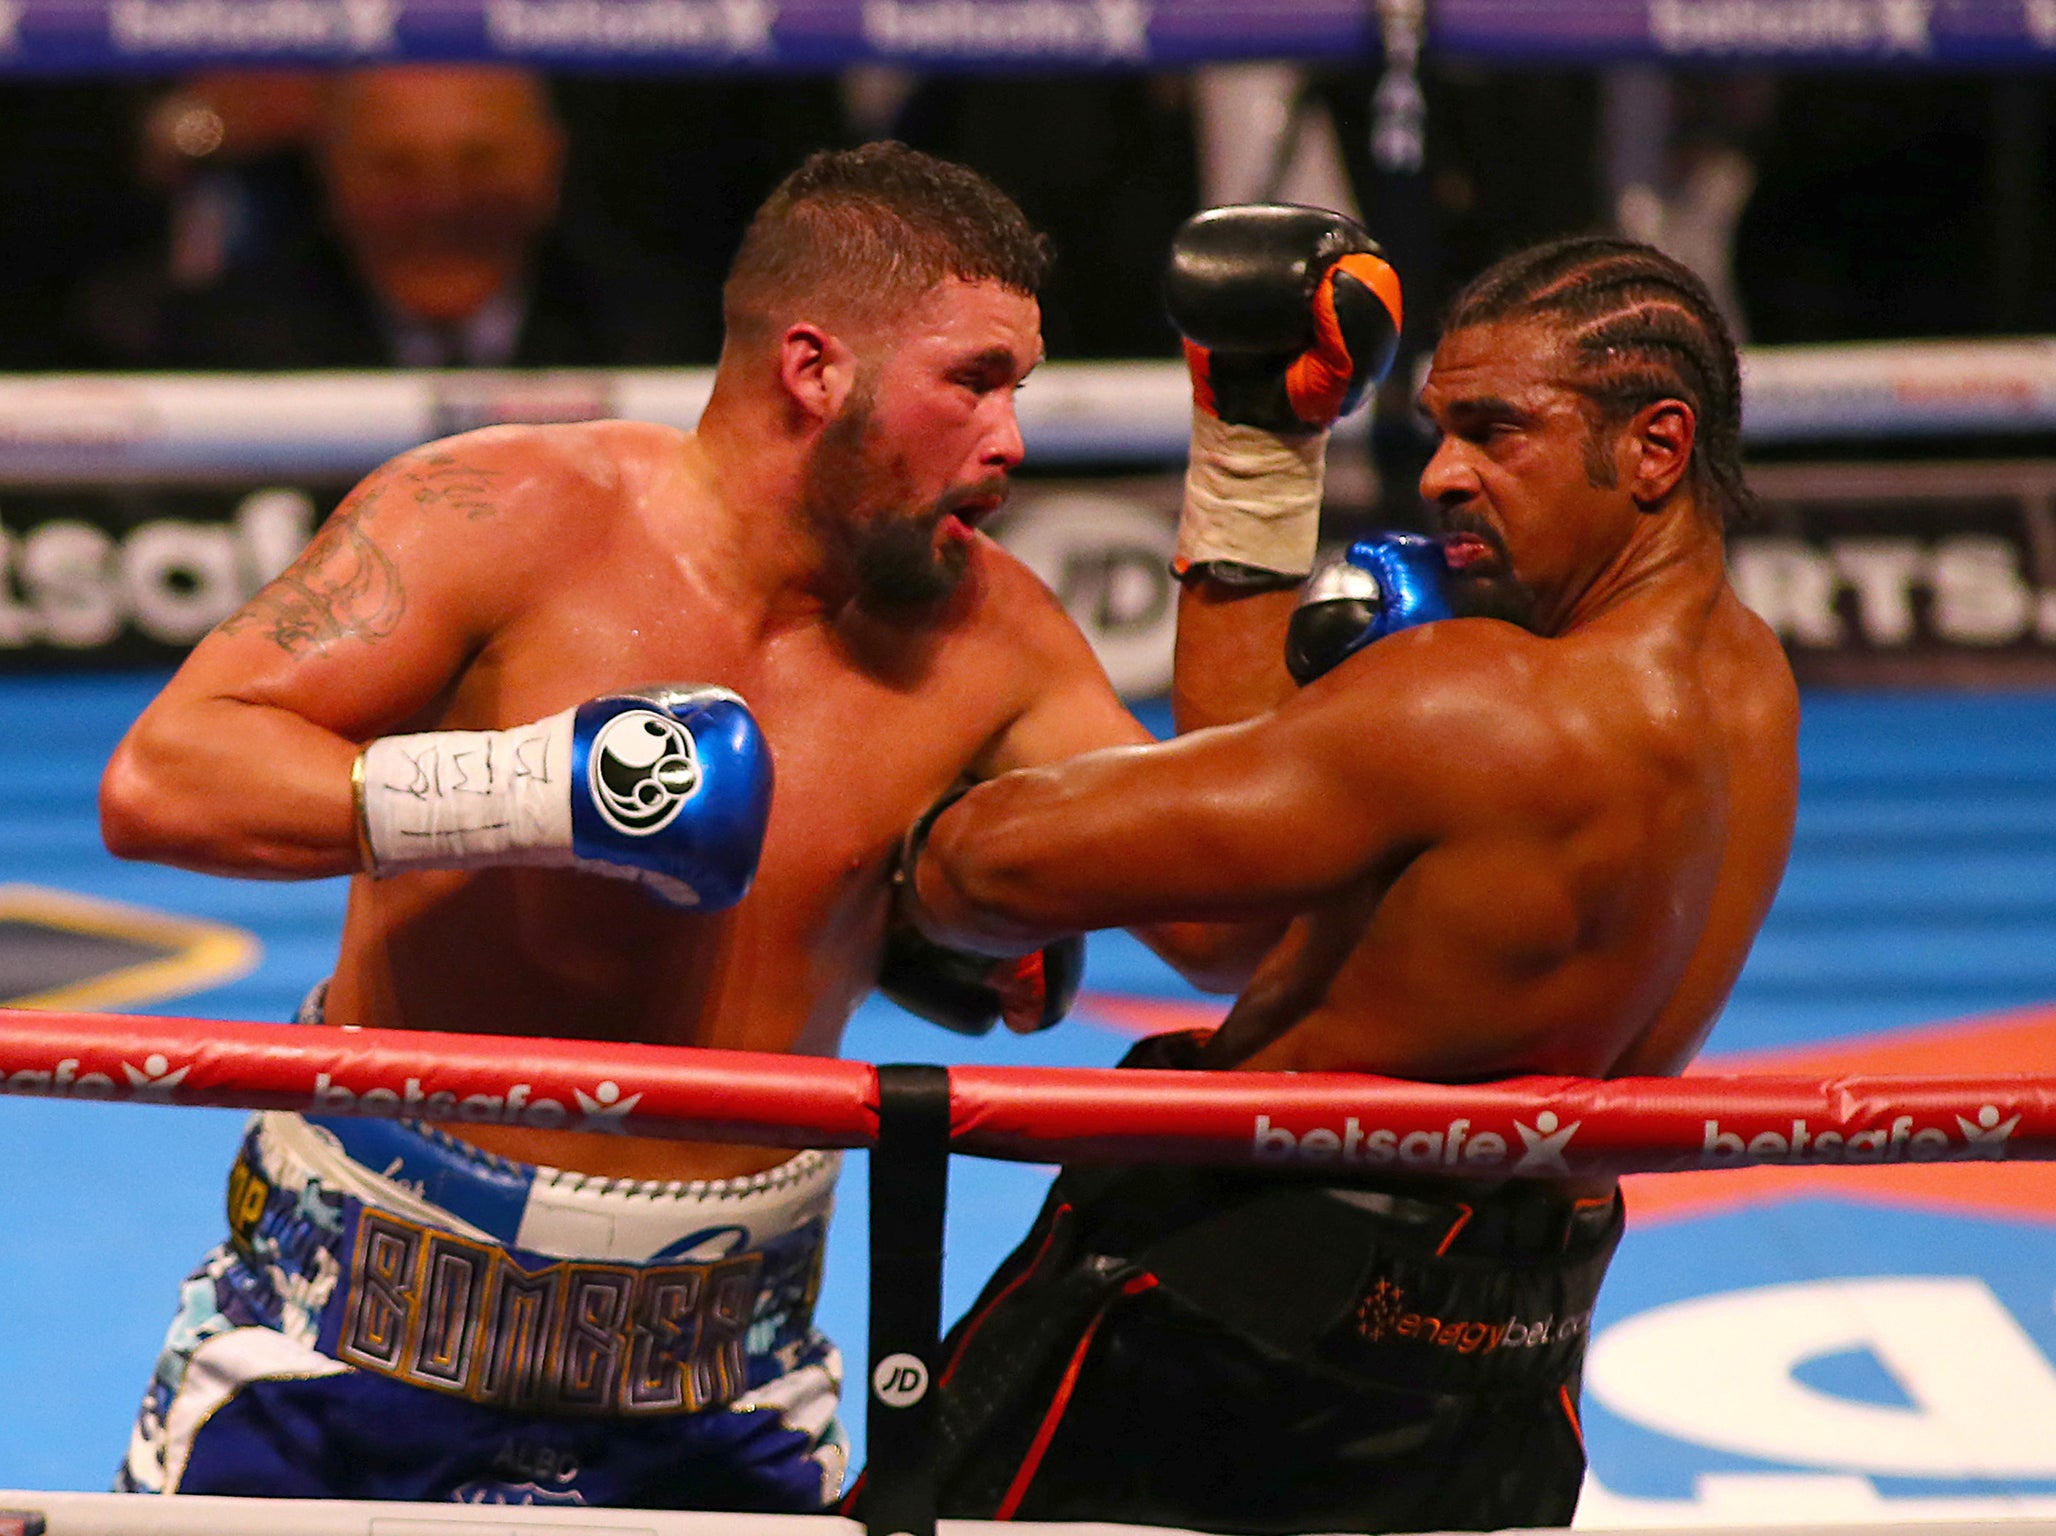 Bellew and Haye will fight in a rematch this December